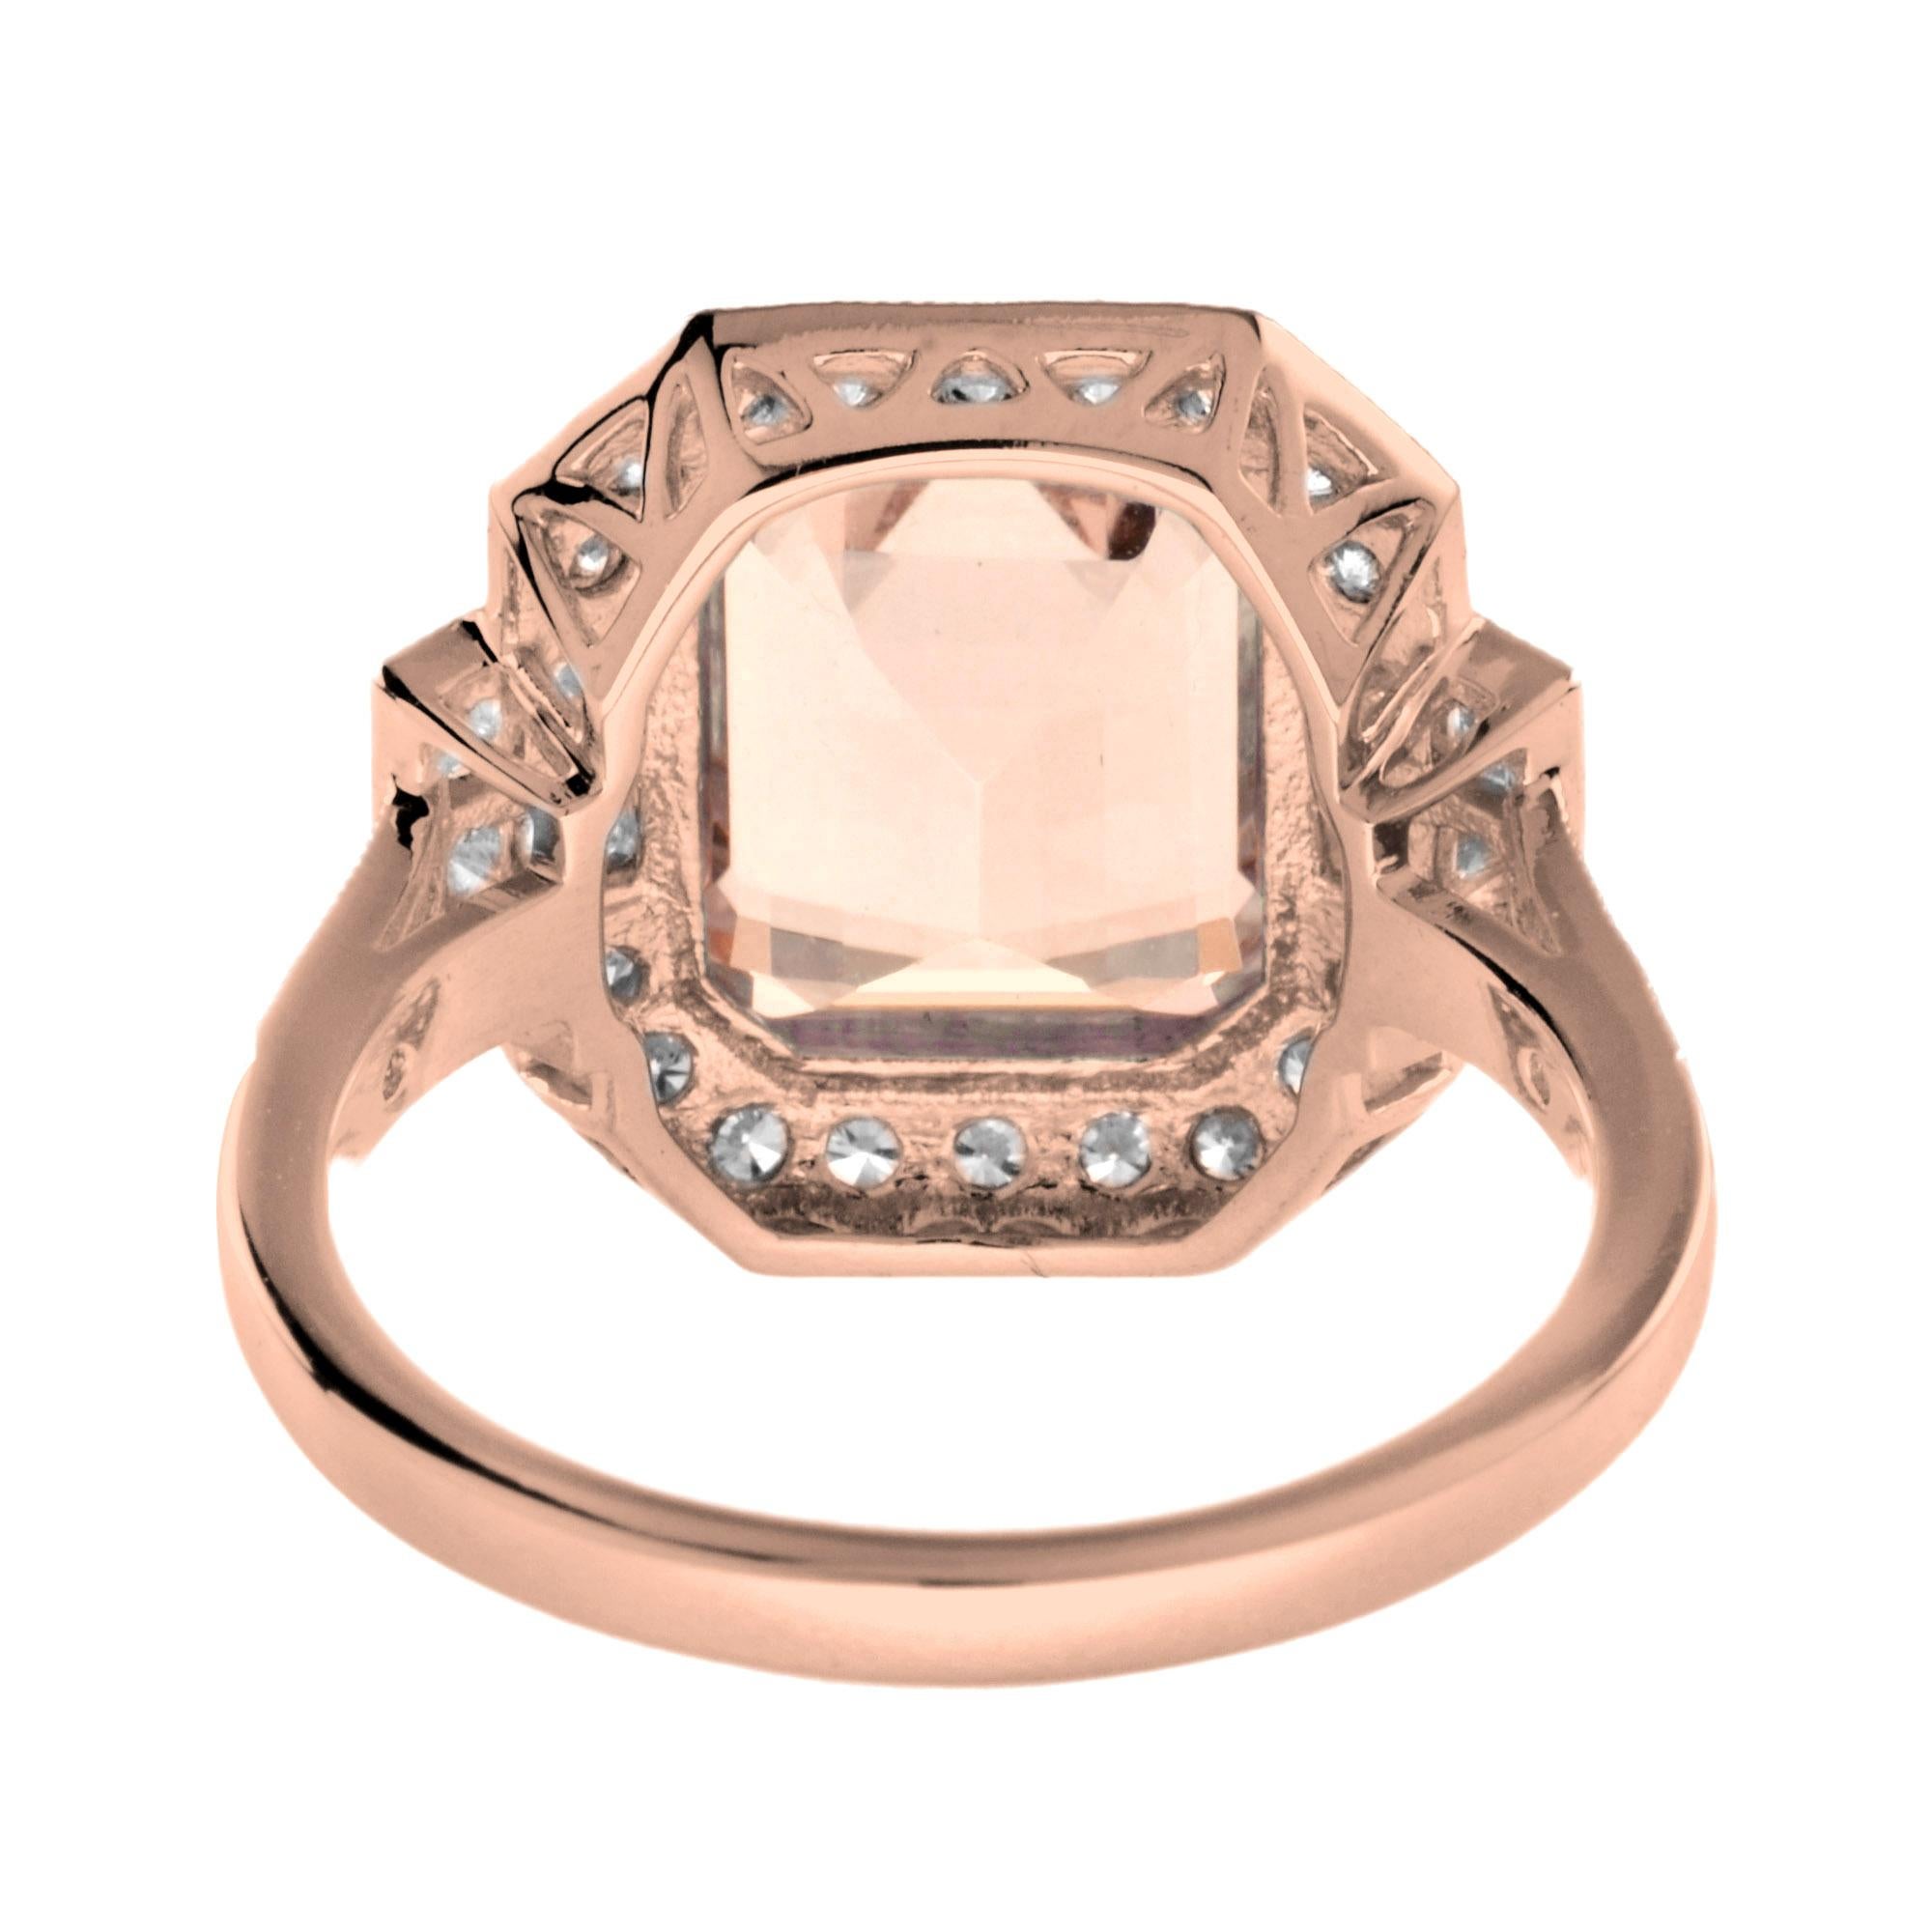 For Sale:  Emerald Cut Morganite and Diamond Engagement Ring in 18K Rose Gold 5